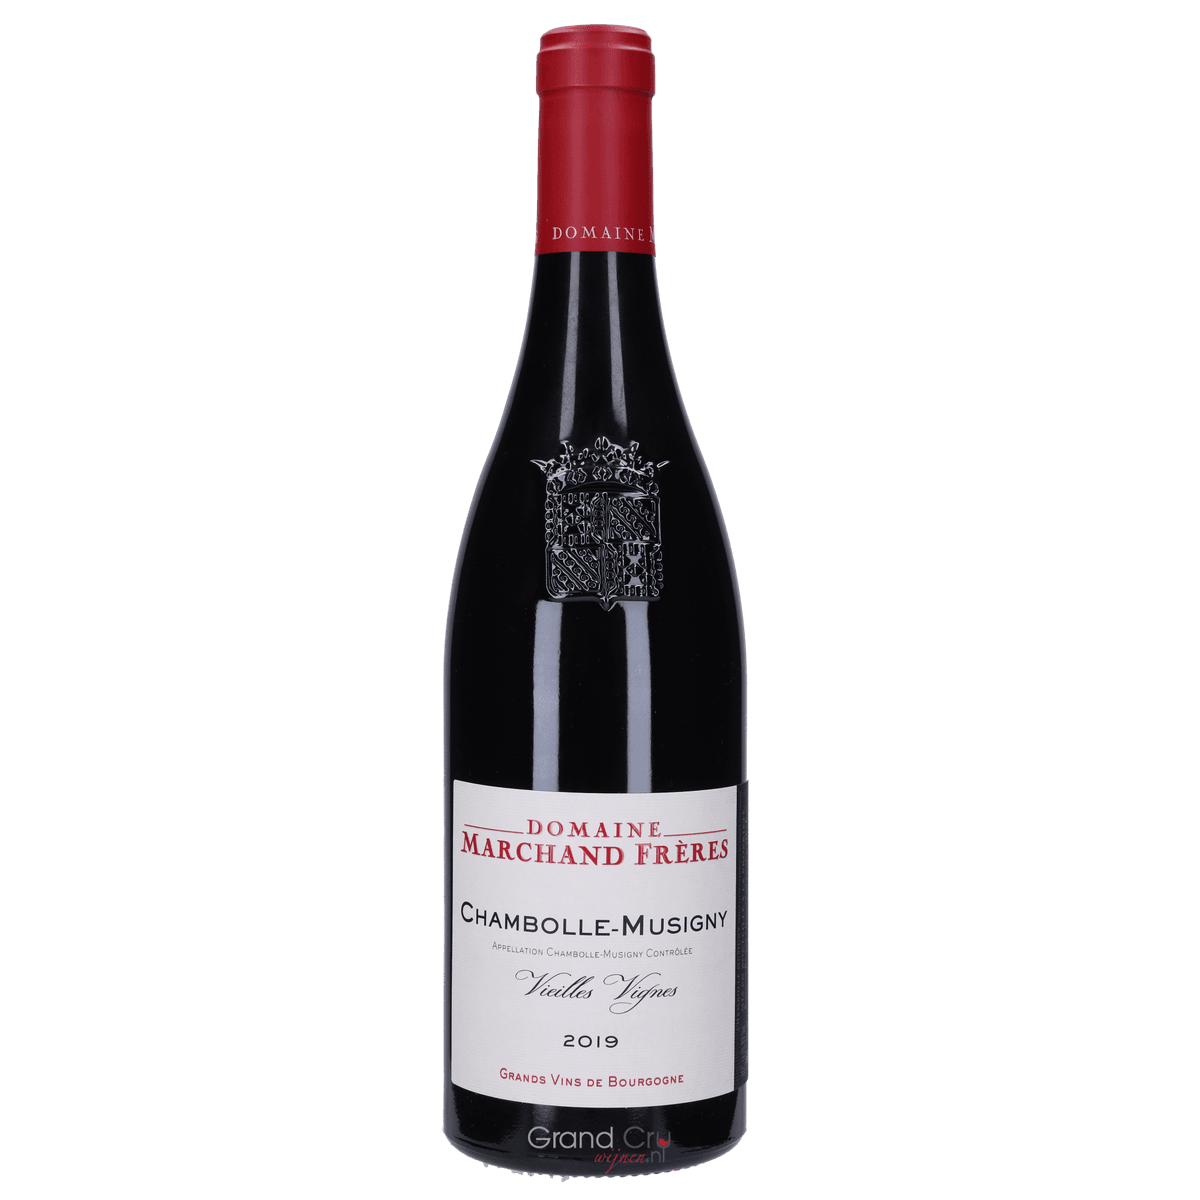 2019 Domaine Marchand Freres Chambolle-Musigny Vieilles Vignes